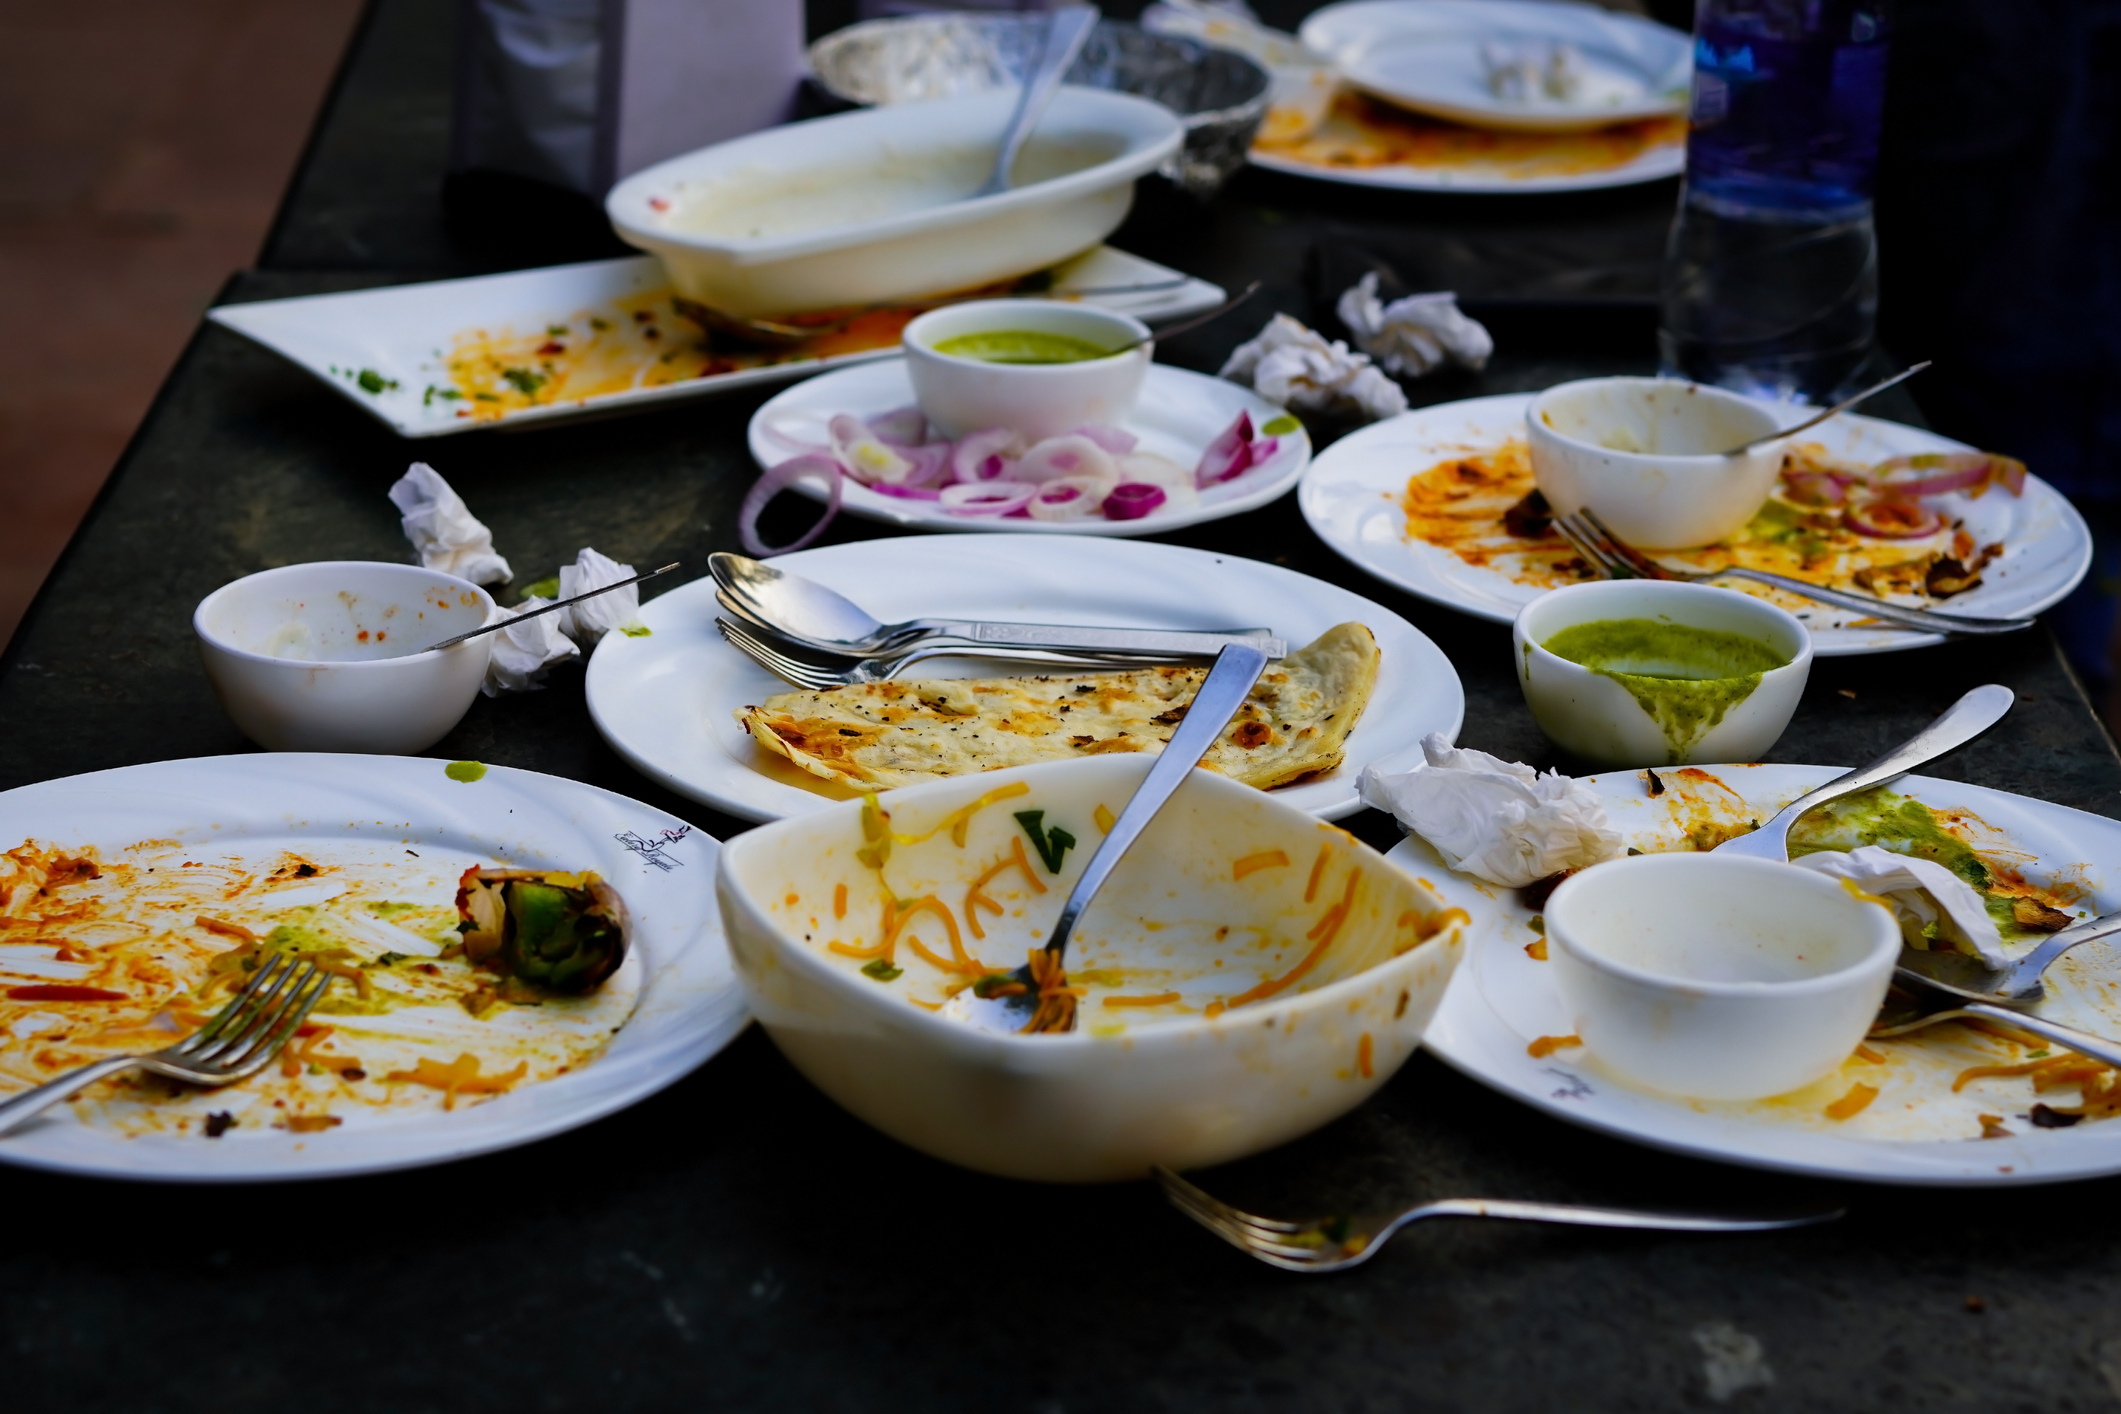 Table with used dishes and leftovers from a meal. Plates and bowls contain remnants of food